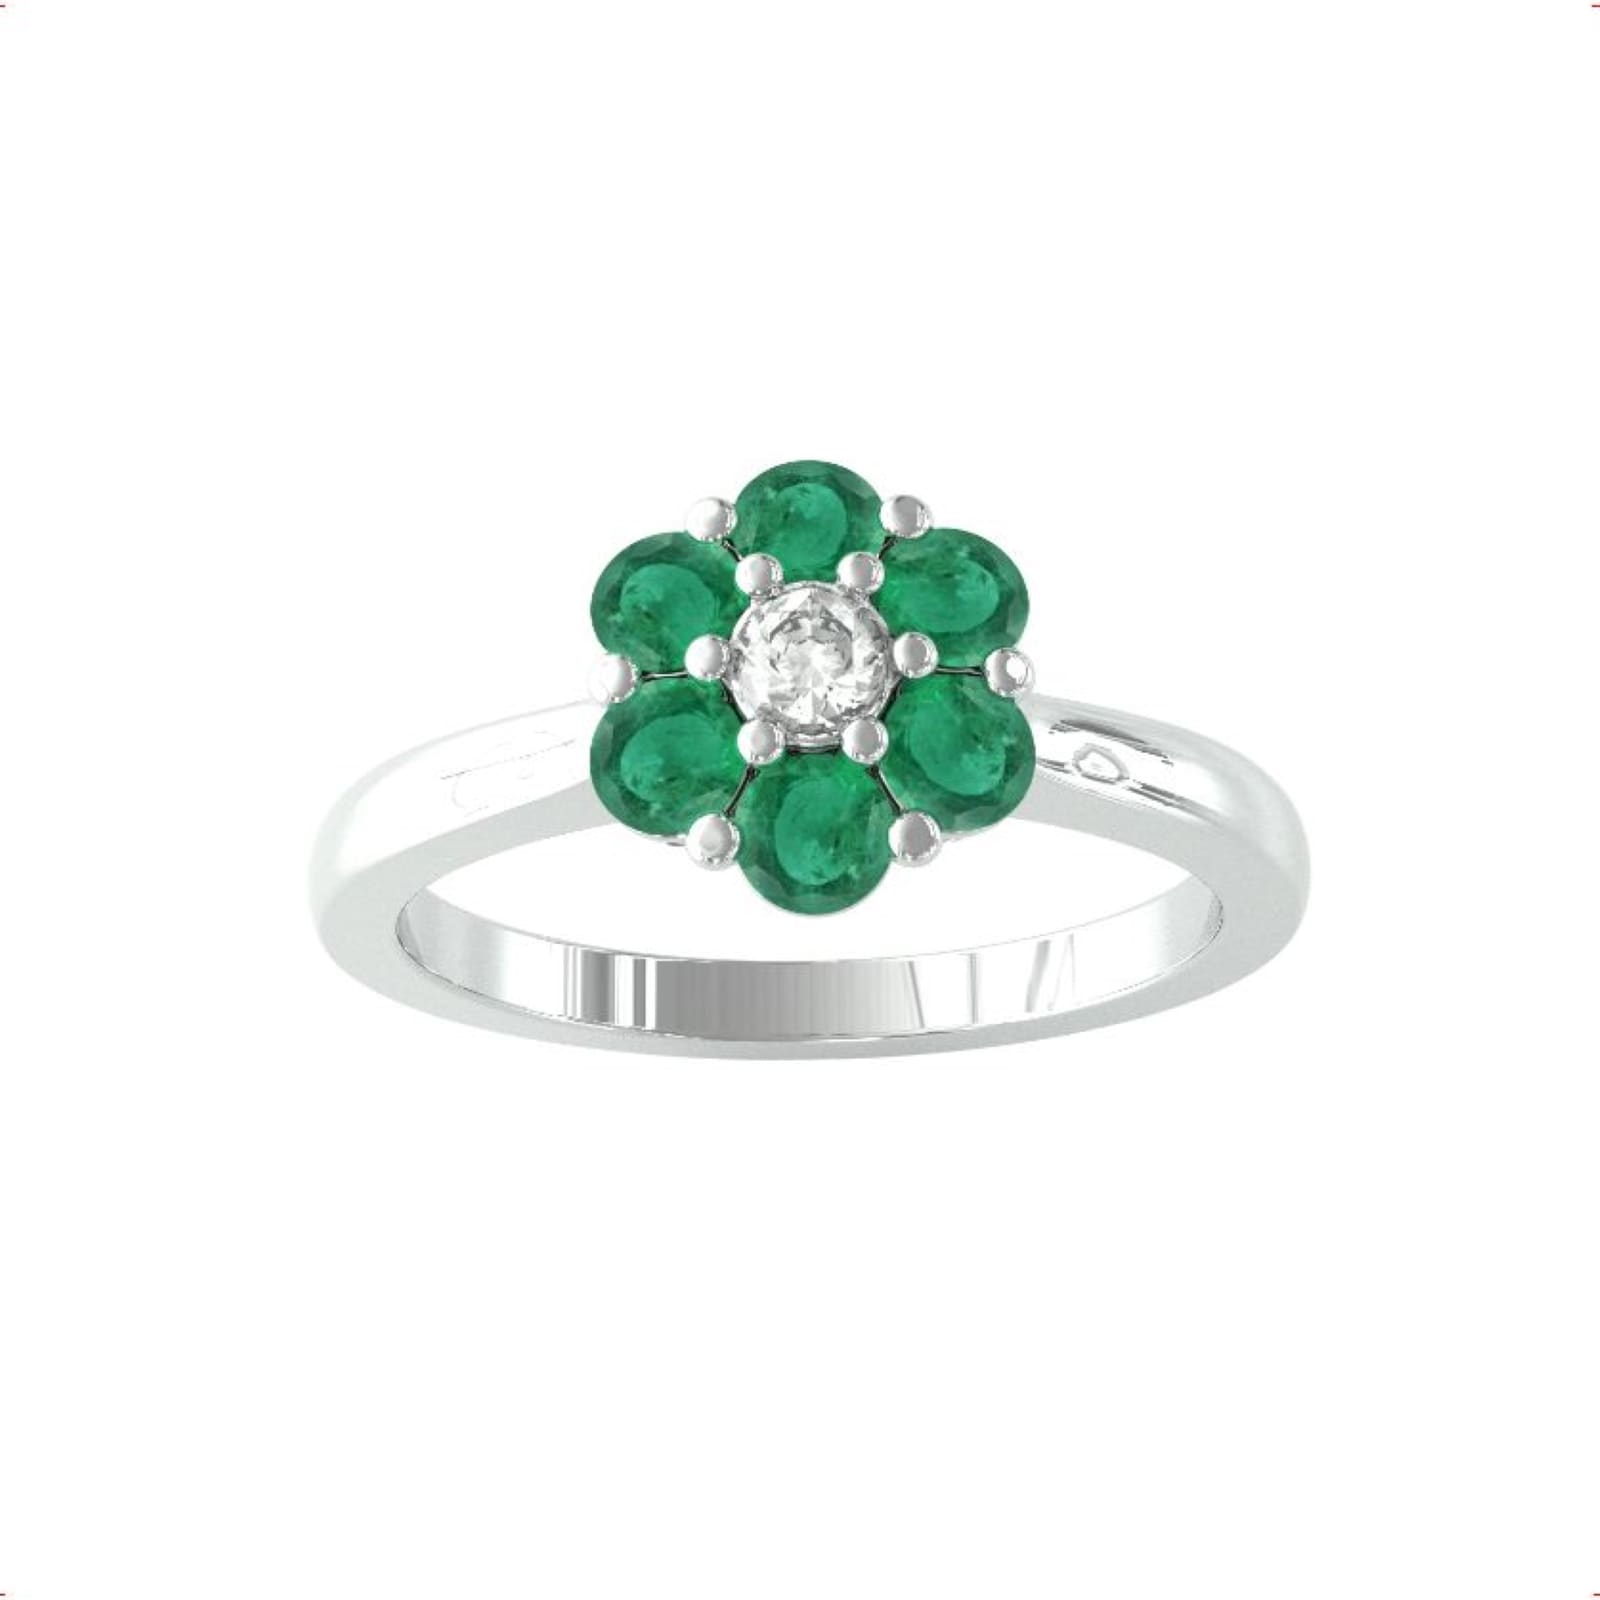 9ct White Gold Emerald & Diamond Cluster Ring - Ring Size Q.5